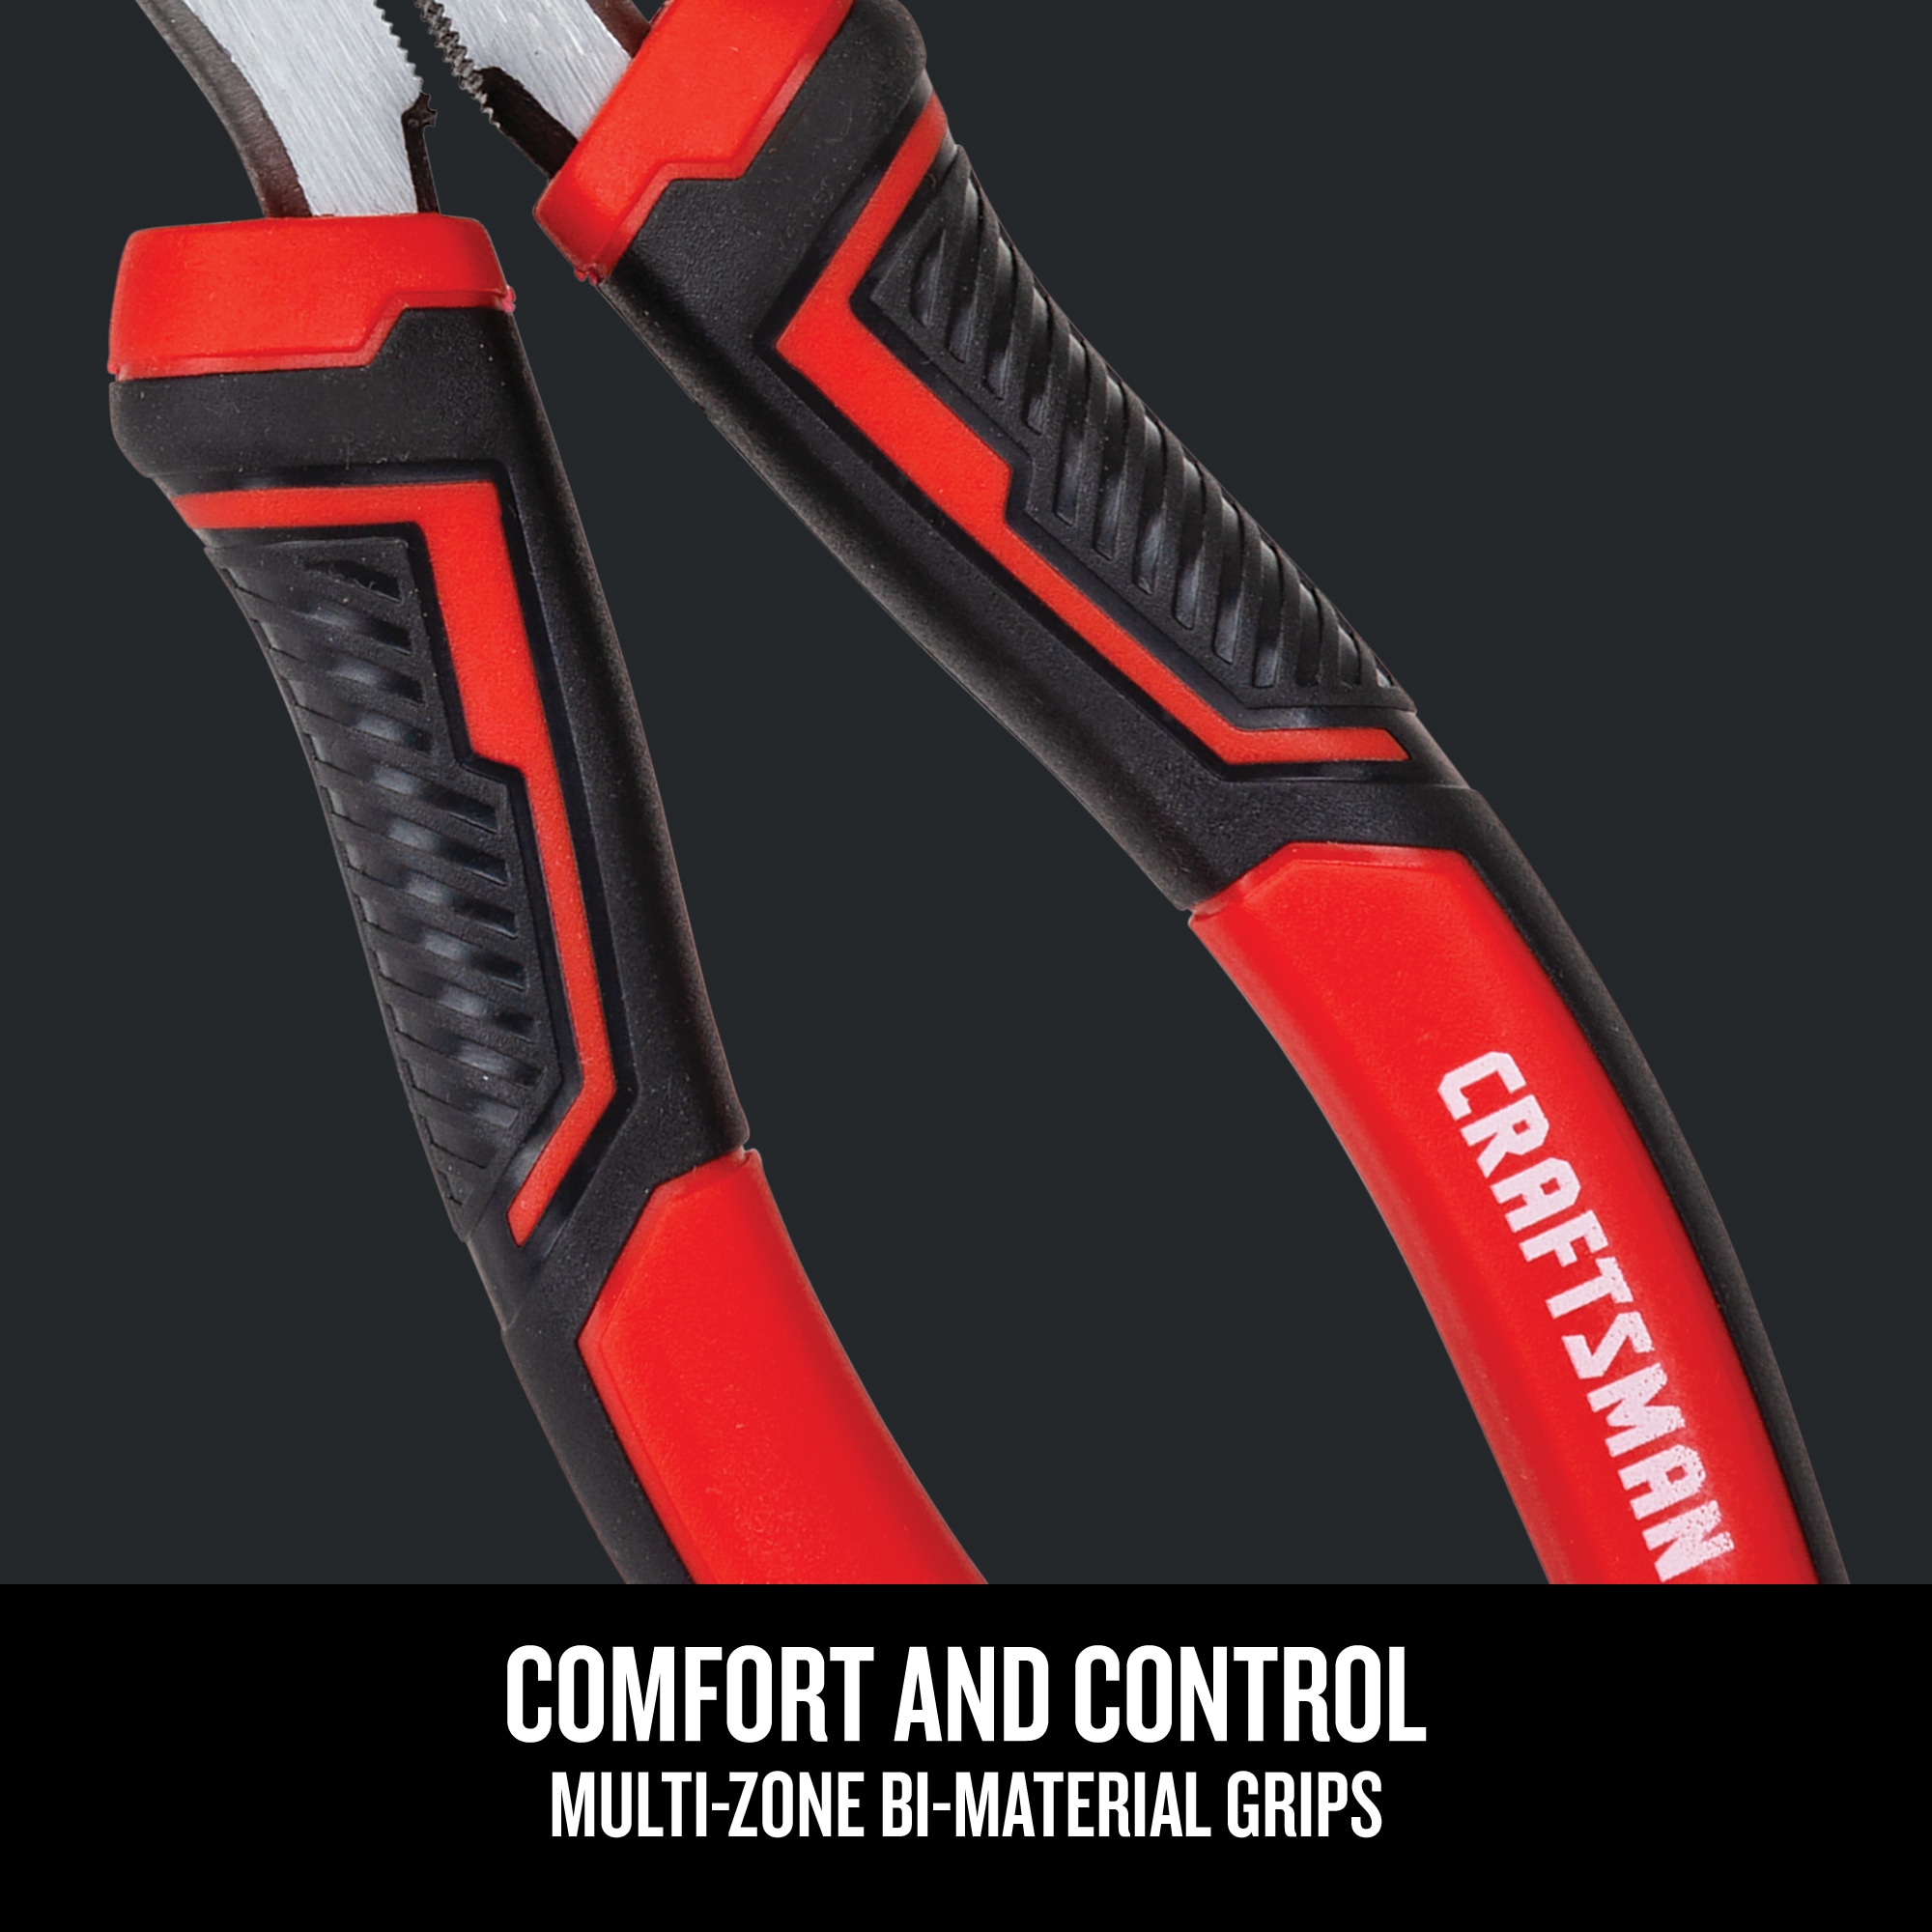 Fleming Supply 6-Piece Insulated Pliers Set with Carrying Case - Durable  Drop Forged and Heat Treated Hand Tools with Ergonomic Comfort Grip in the  Plier Sets department at